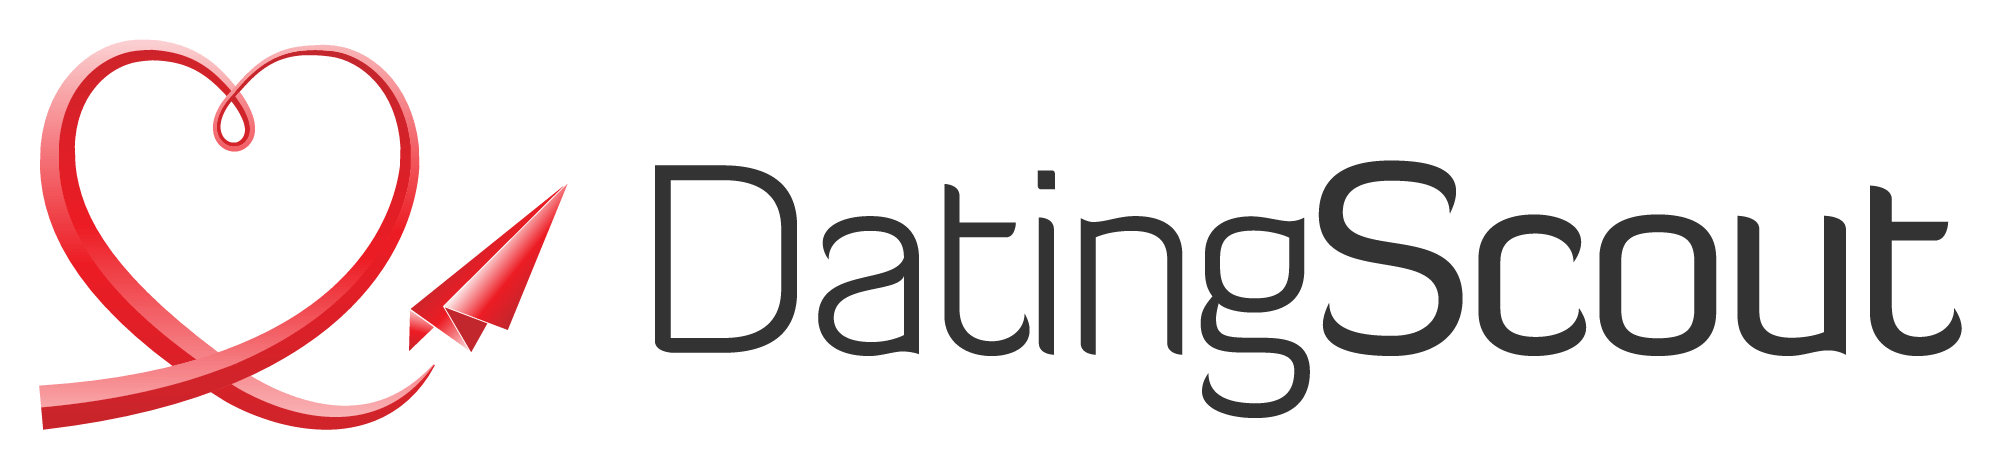 Us dating site